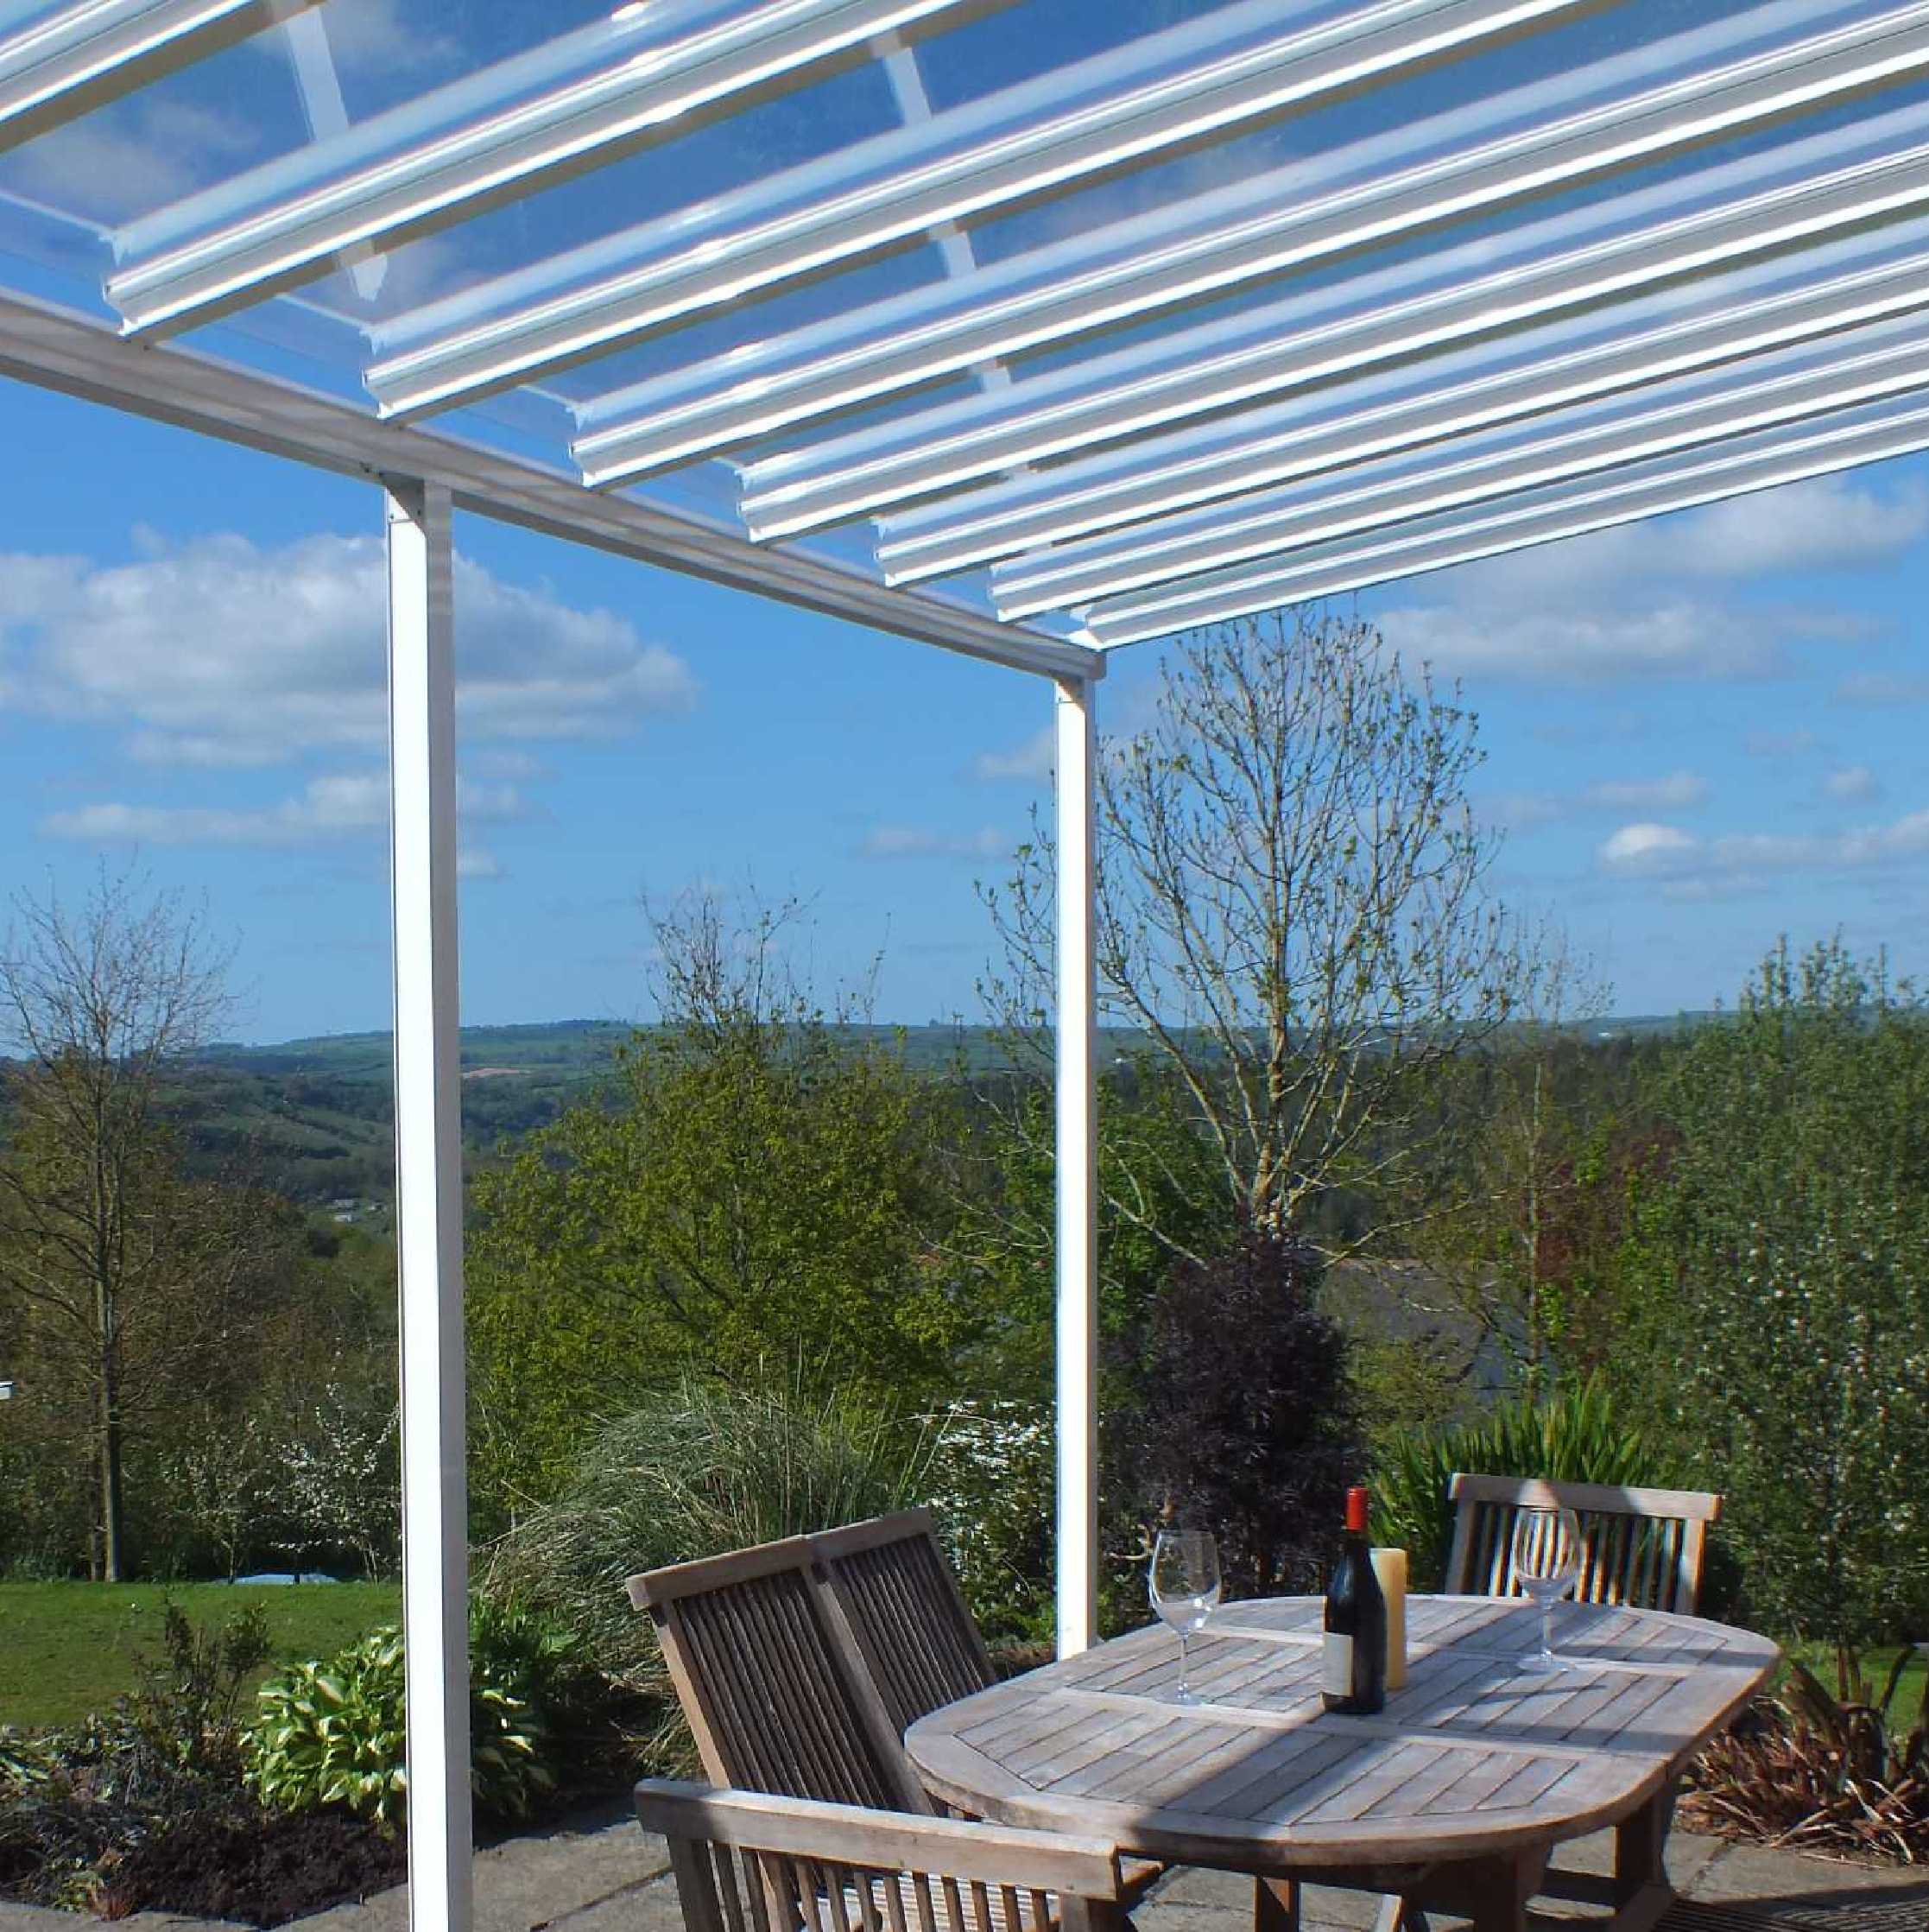 Buy Omega Smart Lean-To Canopy, White with 6mm Glass Clear Plate Polycarbonate Glazing - 10.5m (W) x 2.0m (P), (5) Supporting Posts online today